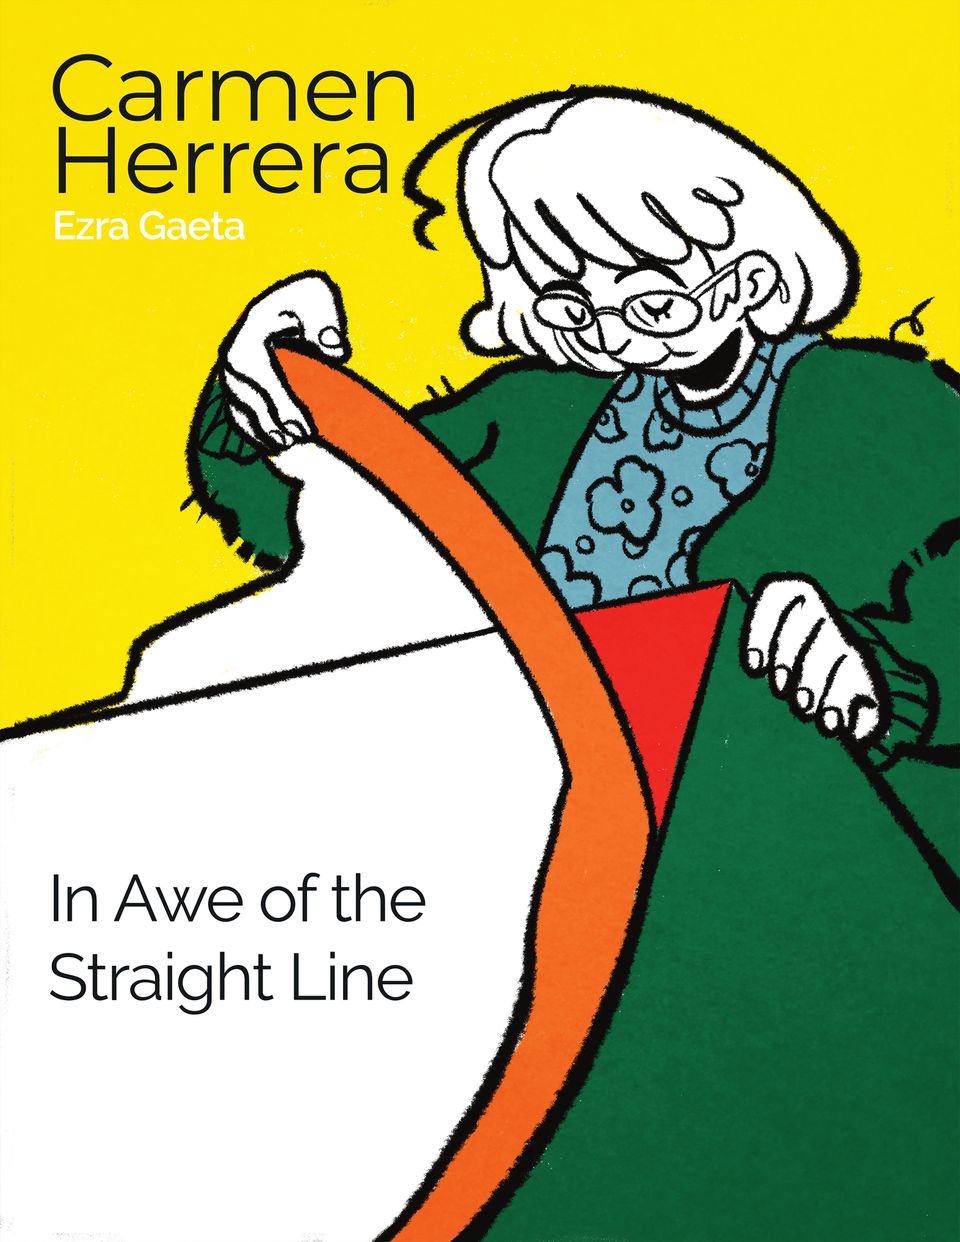 In Awe of the Straight Line: A Comic About Carmen Herrera, cover